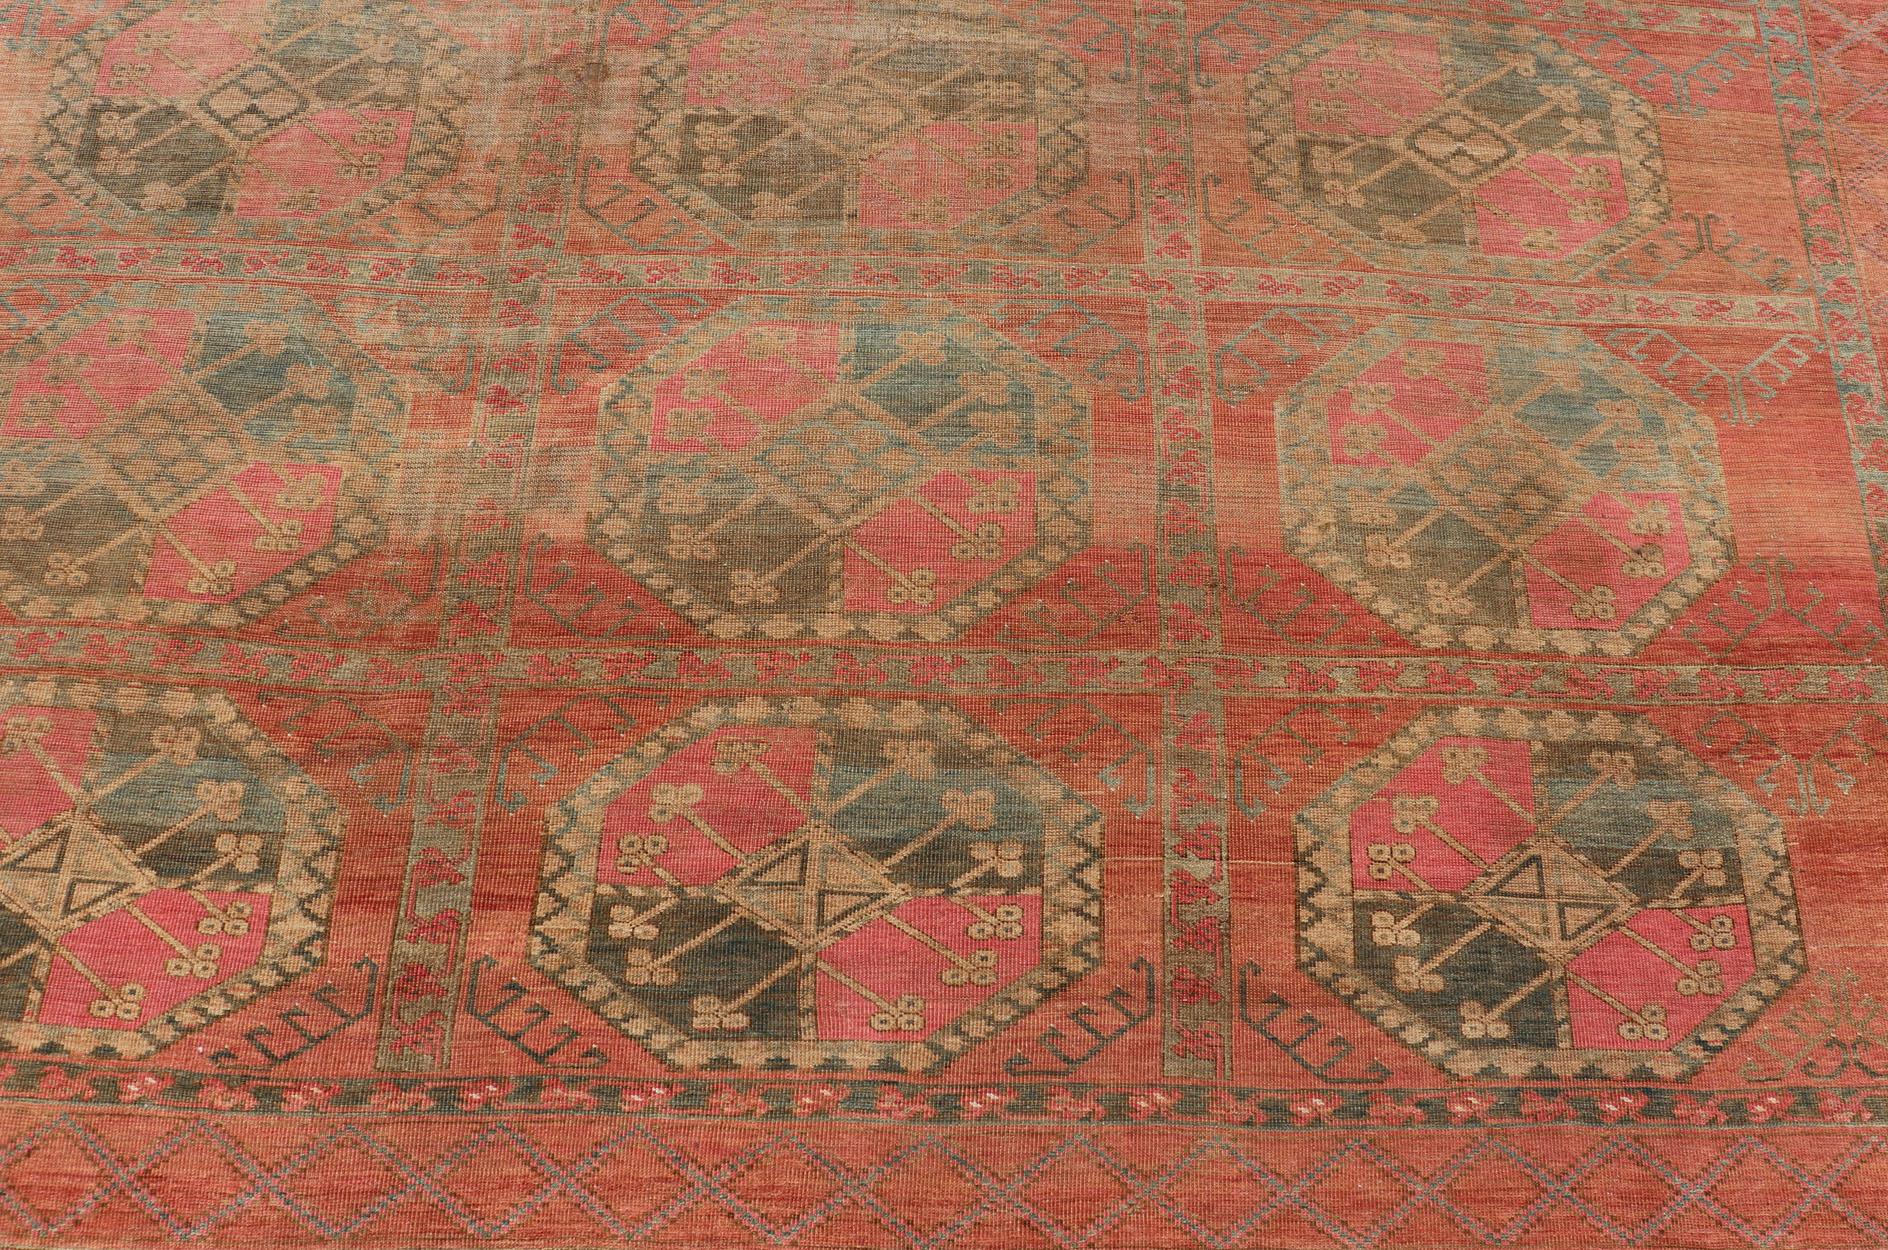 Large Turkomen Ersari Rug with All-Over Gul Design in Tan, Coral, and Brown For Sale 1